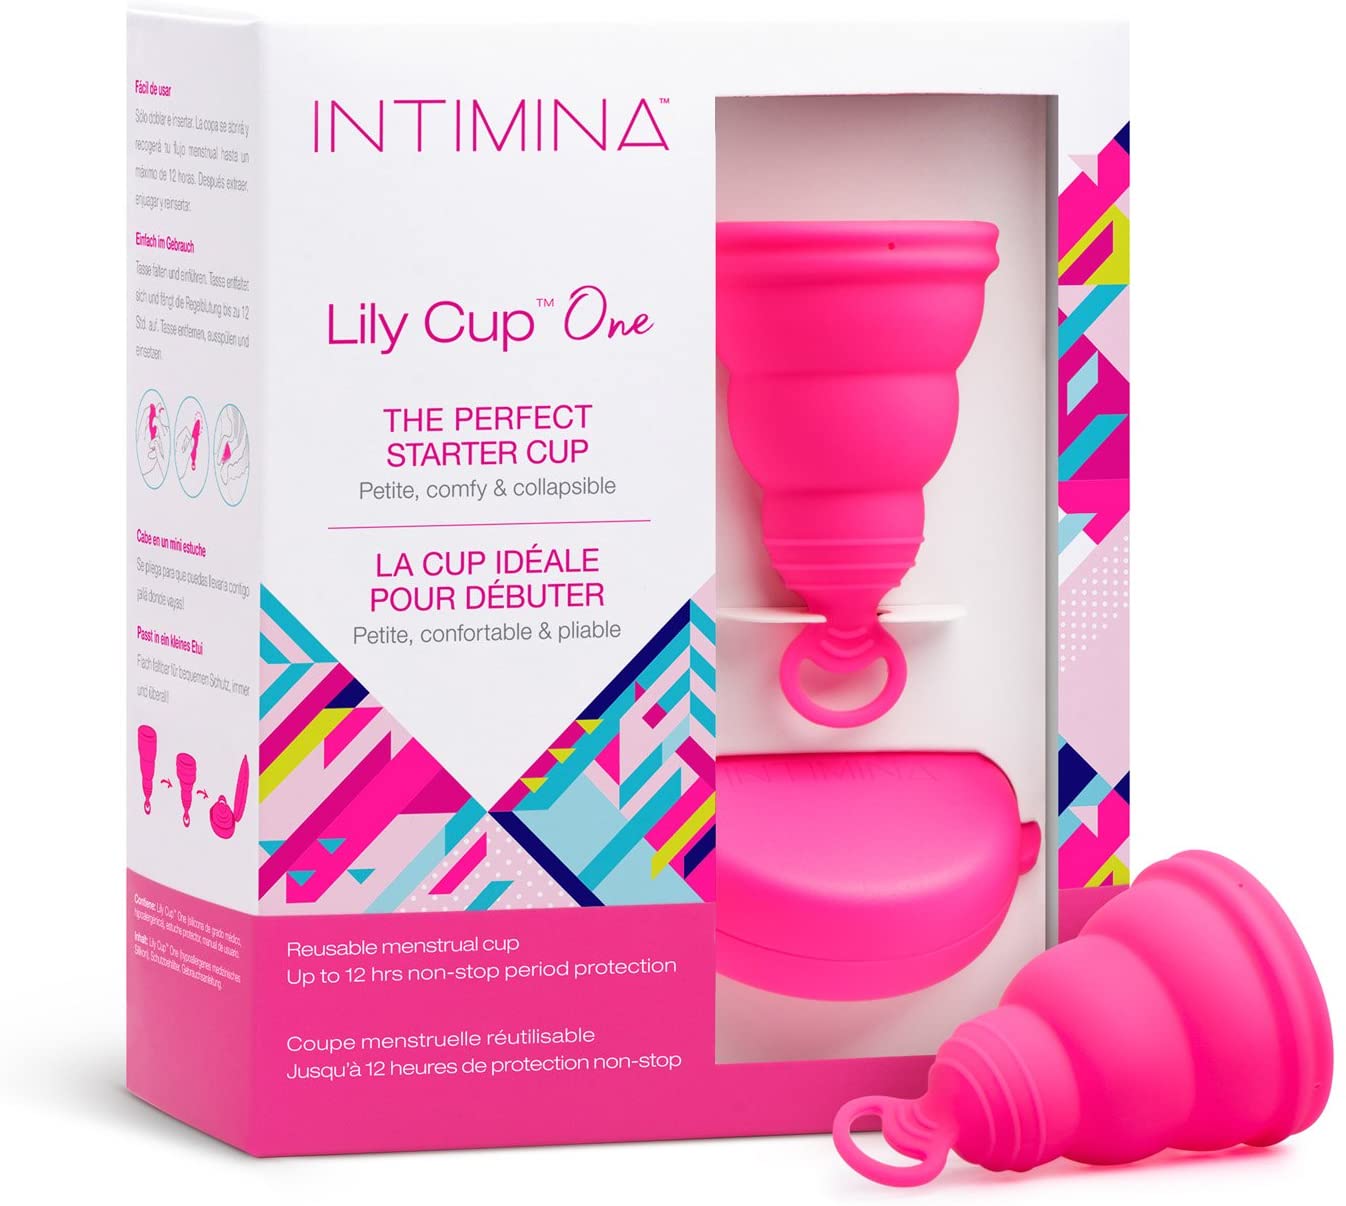 Lily Cup One The Perfect Starter  Menstrual Cup Cup #6065 - Intimina Available at Online Family Pharmacy Qatar Doha